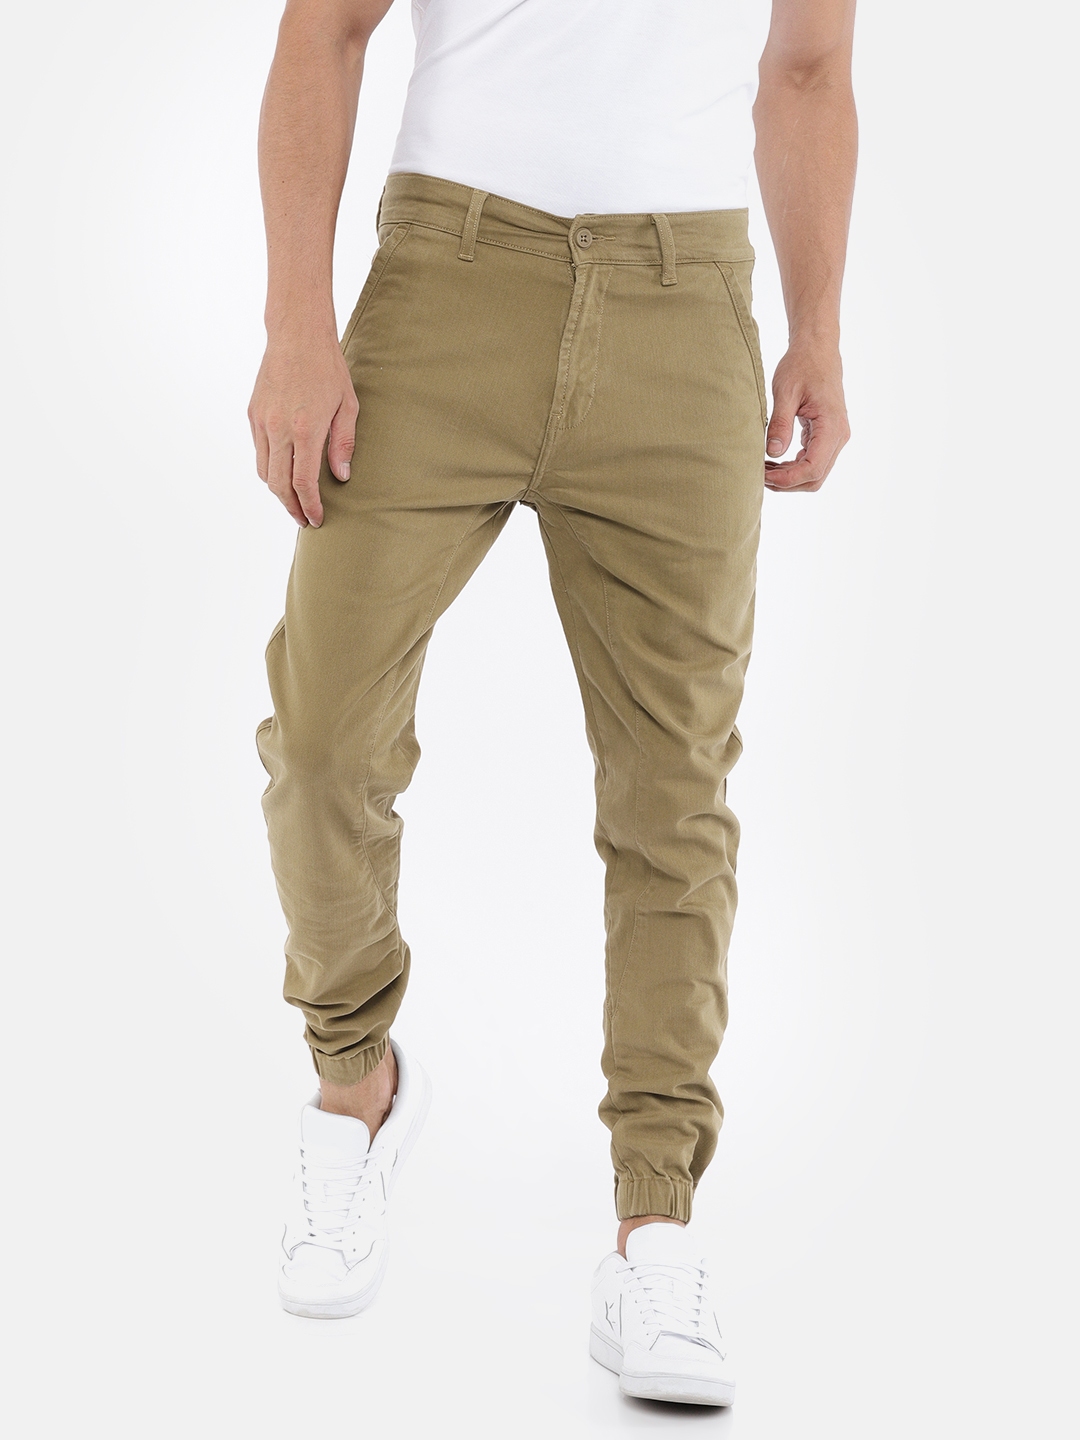 Wrangler Cowboy Cut Tan Slim Fit Jeans available at Cavenders